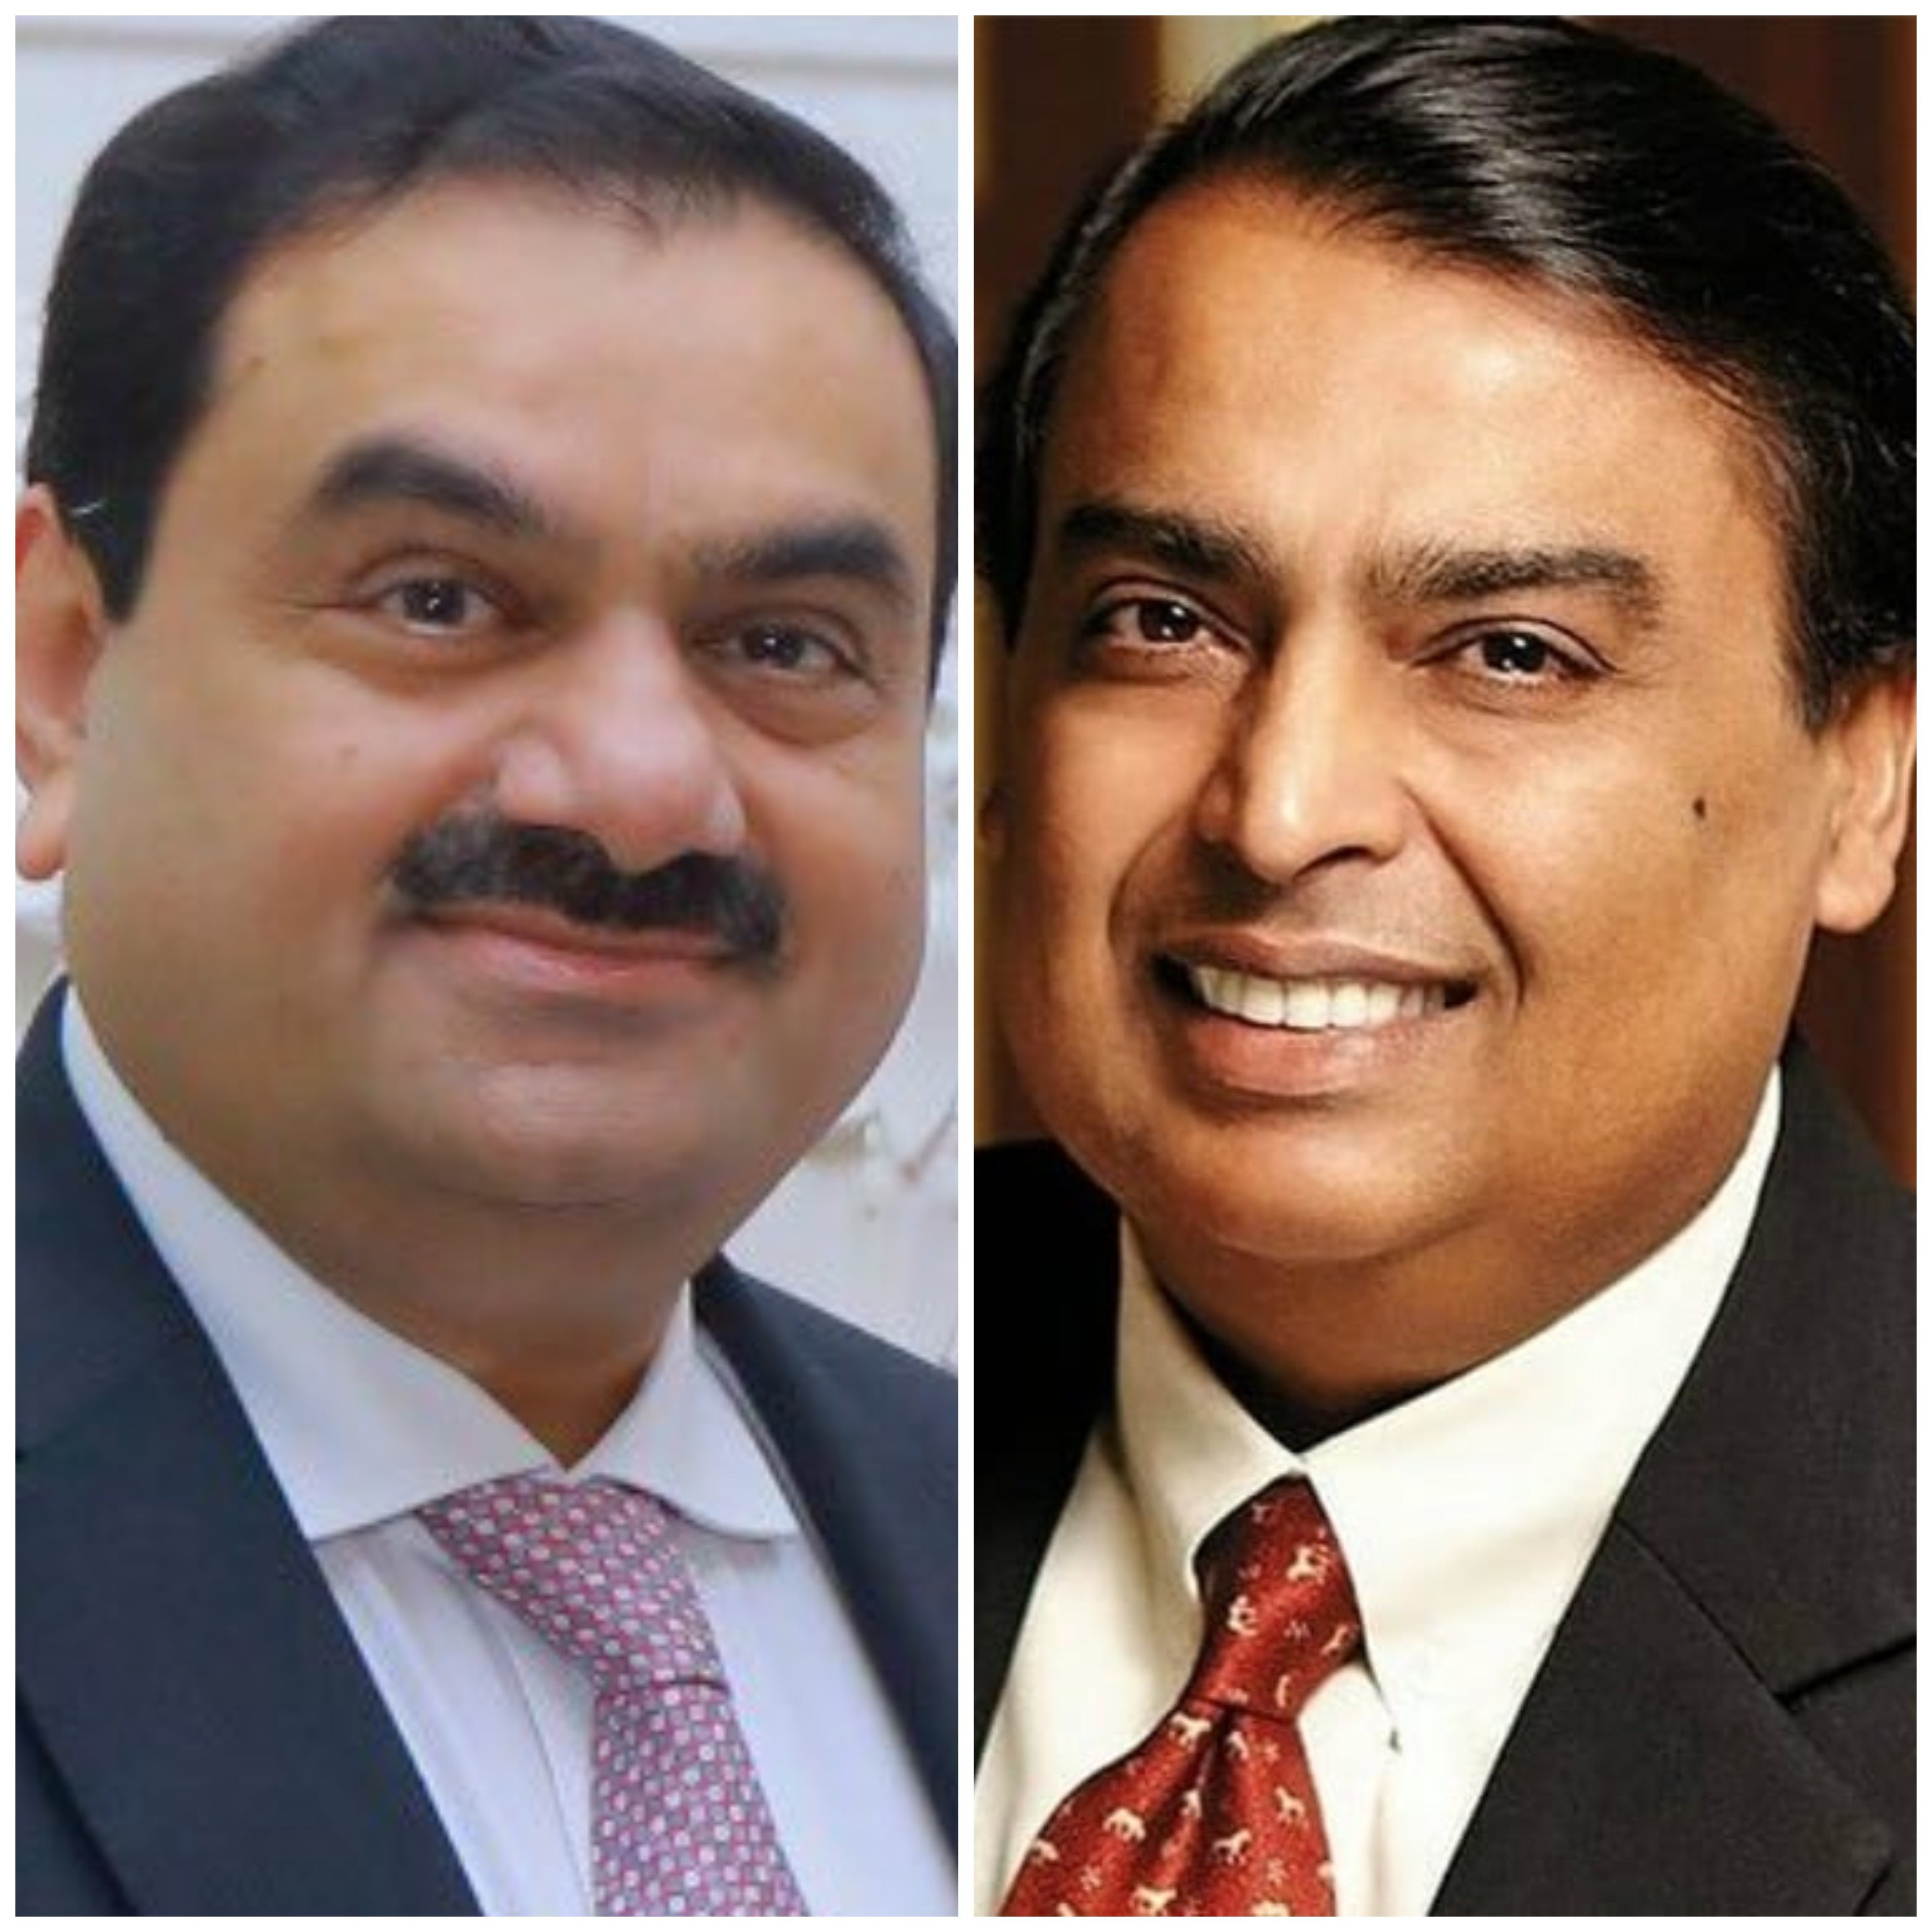 Gautam Adani (left) dethroned Mukesh Ambani as Asia’s richest man earlier this year, but which Indian tycoon really knows how to enjoy their wealth? Photos: @deepakpatel_91/Twitter, @mukeshambaniofficial/Instagram